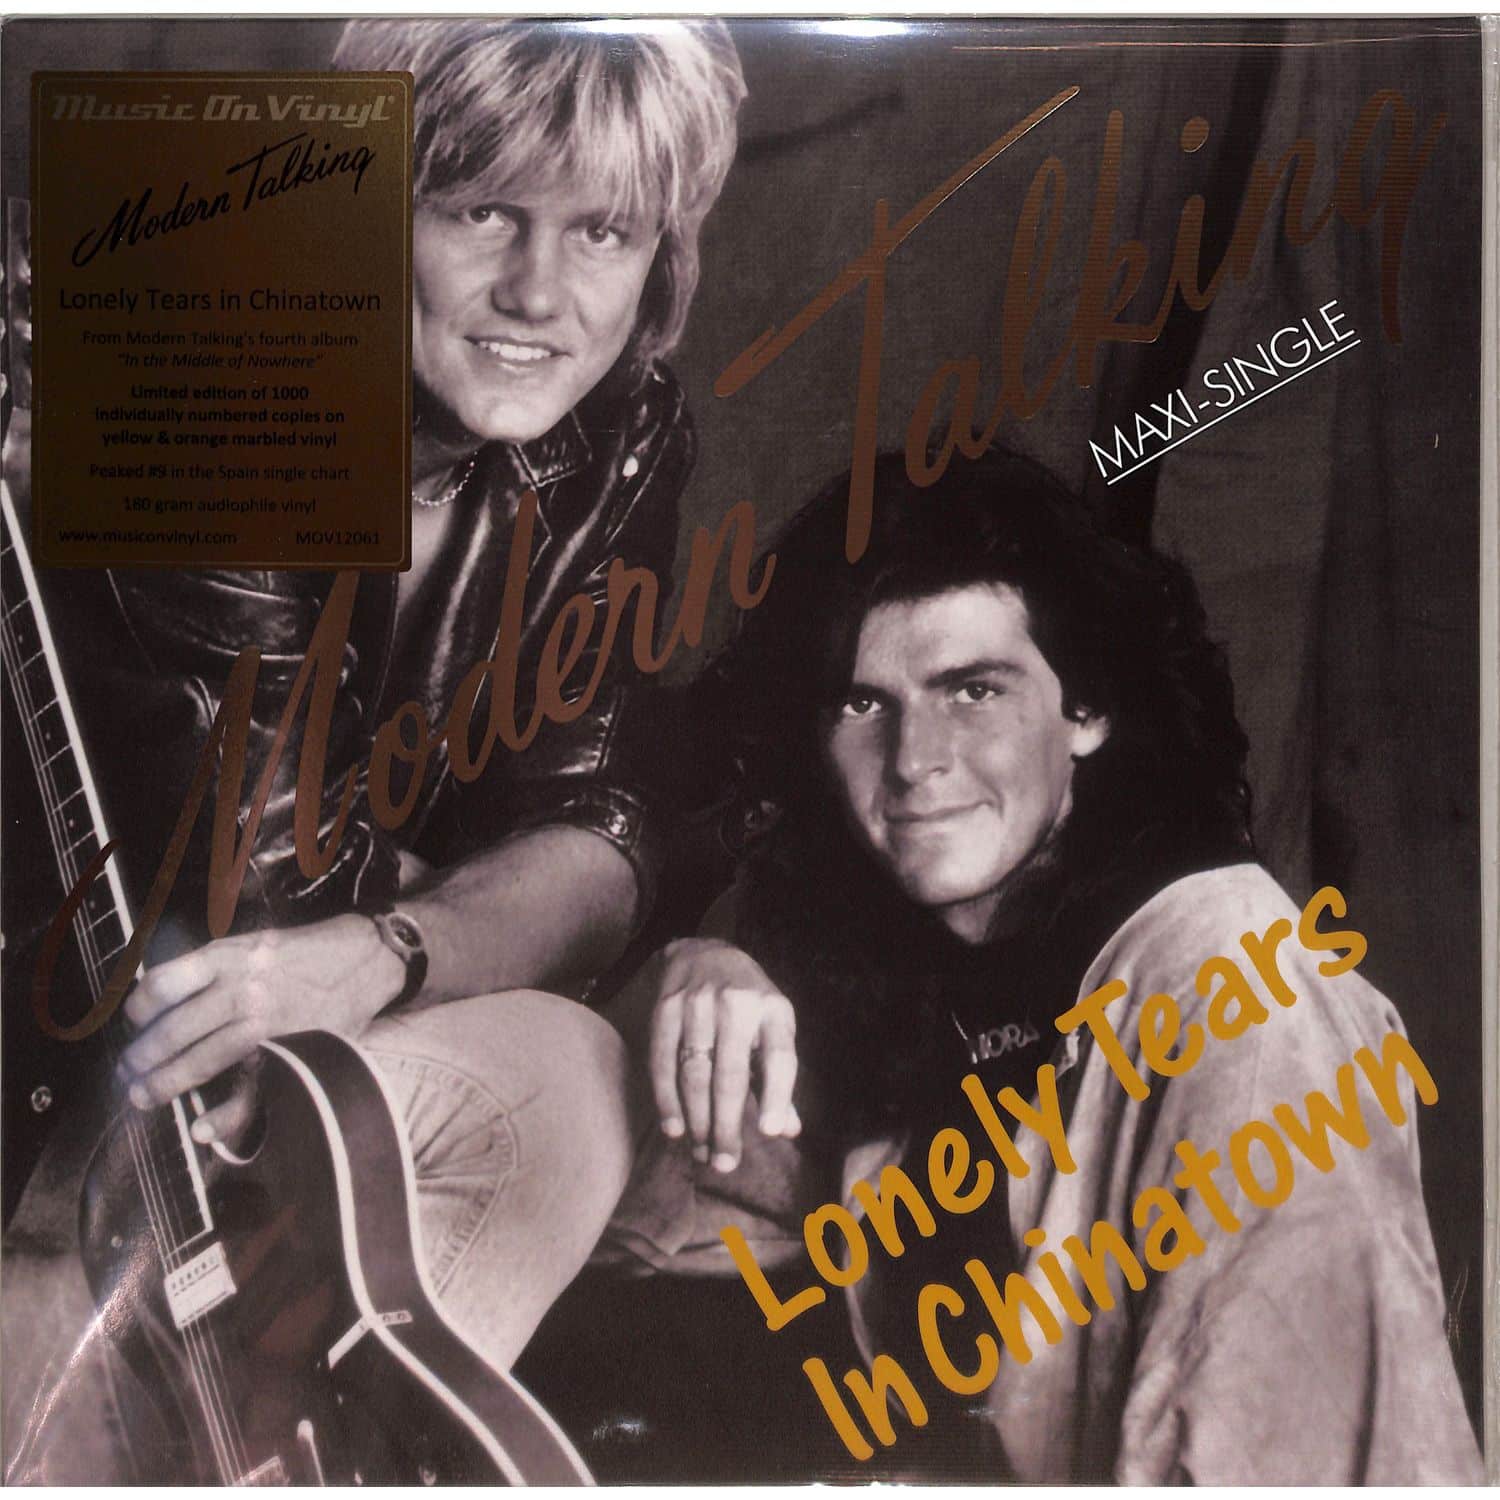 Modern Talking - LONELY TEARS IN CHINATOWN 